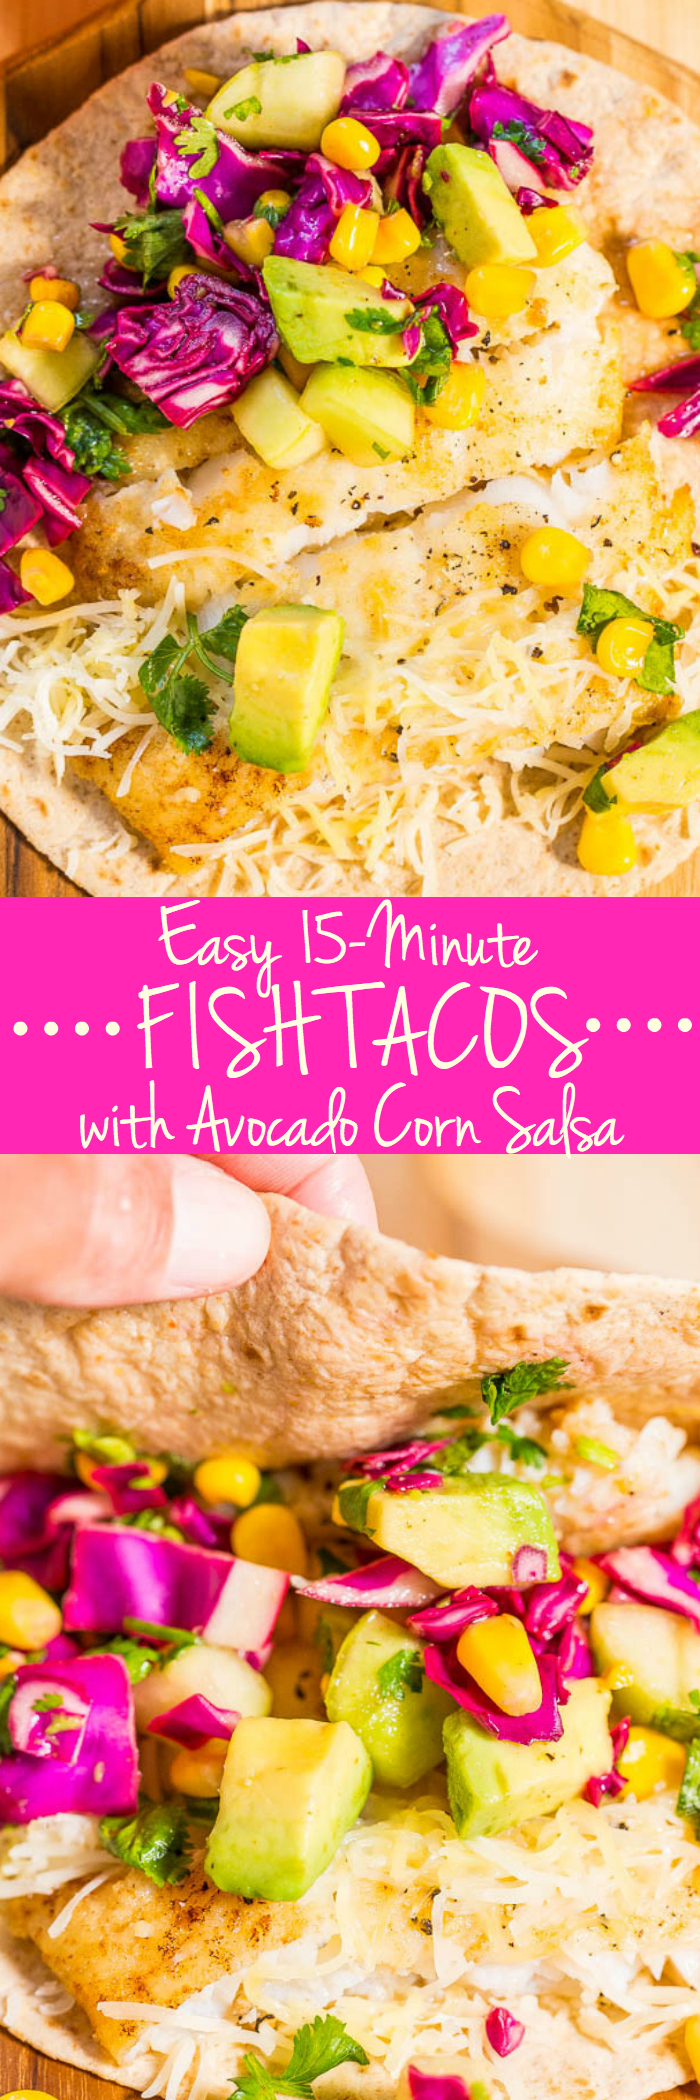 Easy 15-Minute Fish Tacos with Avocado Corn Salsa - Tons of big flavors in a fast, fresh and healthy meal!! A clean-eating recipe that tastes like comfort food!